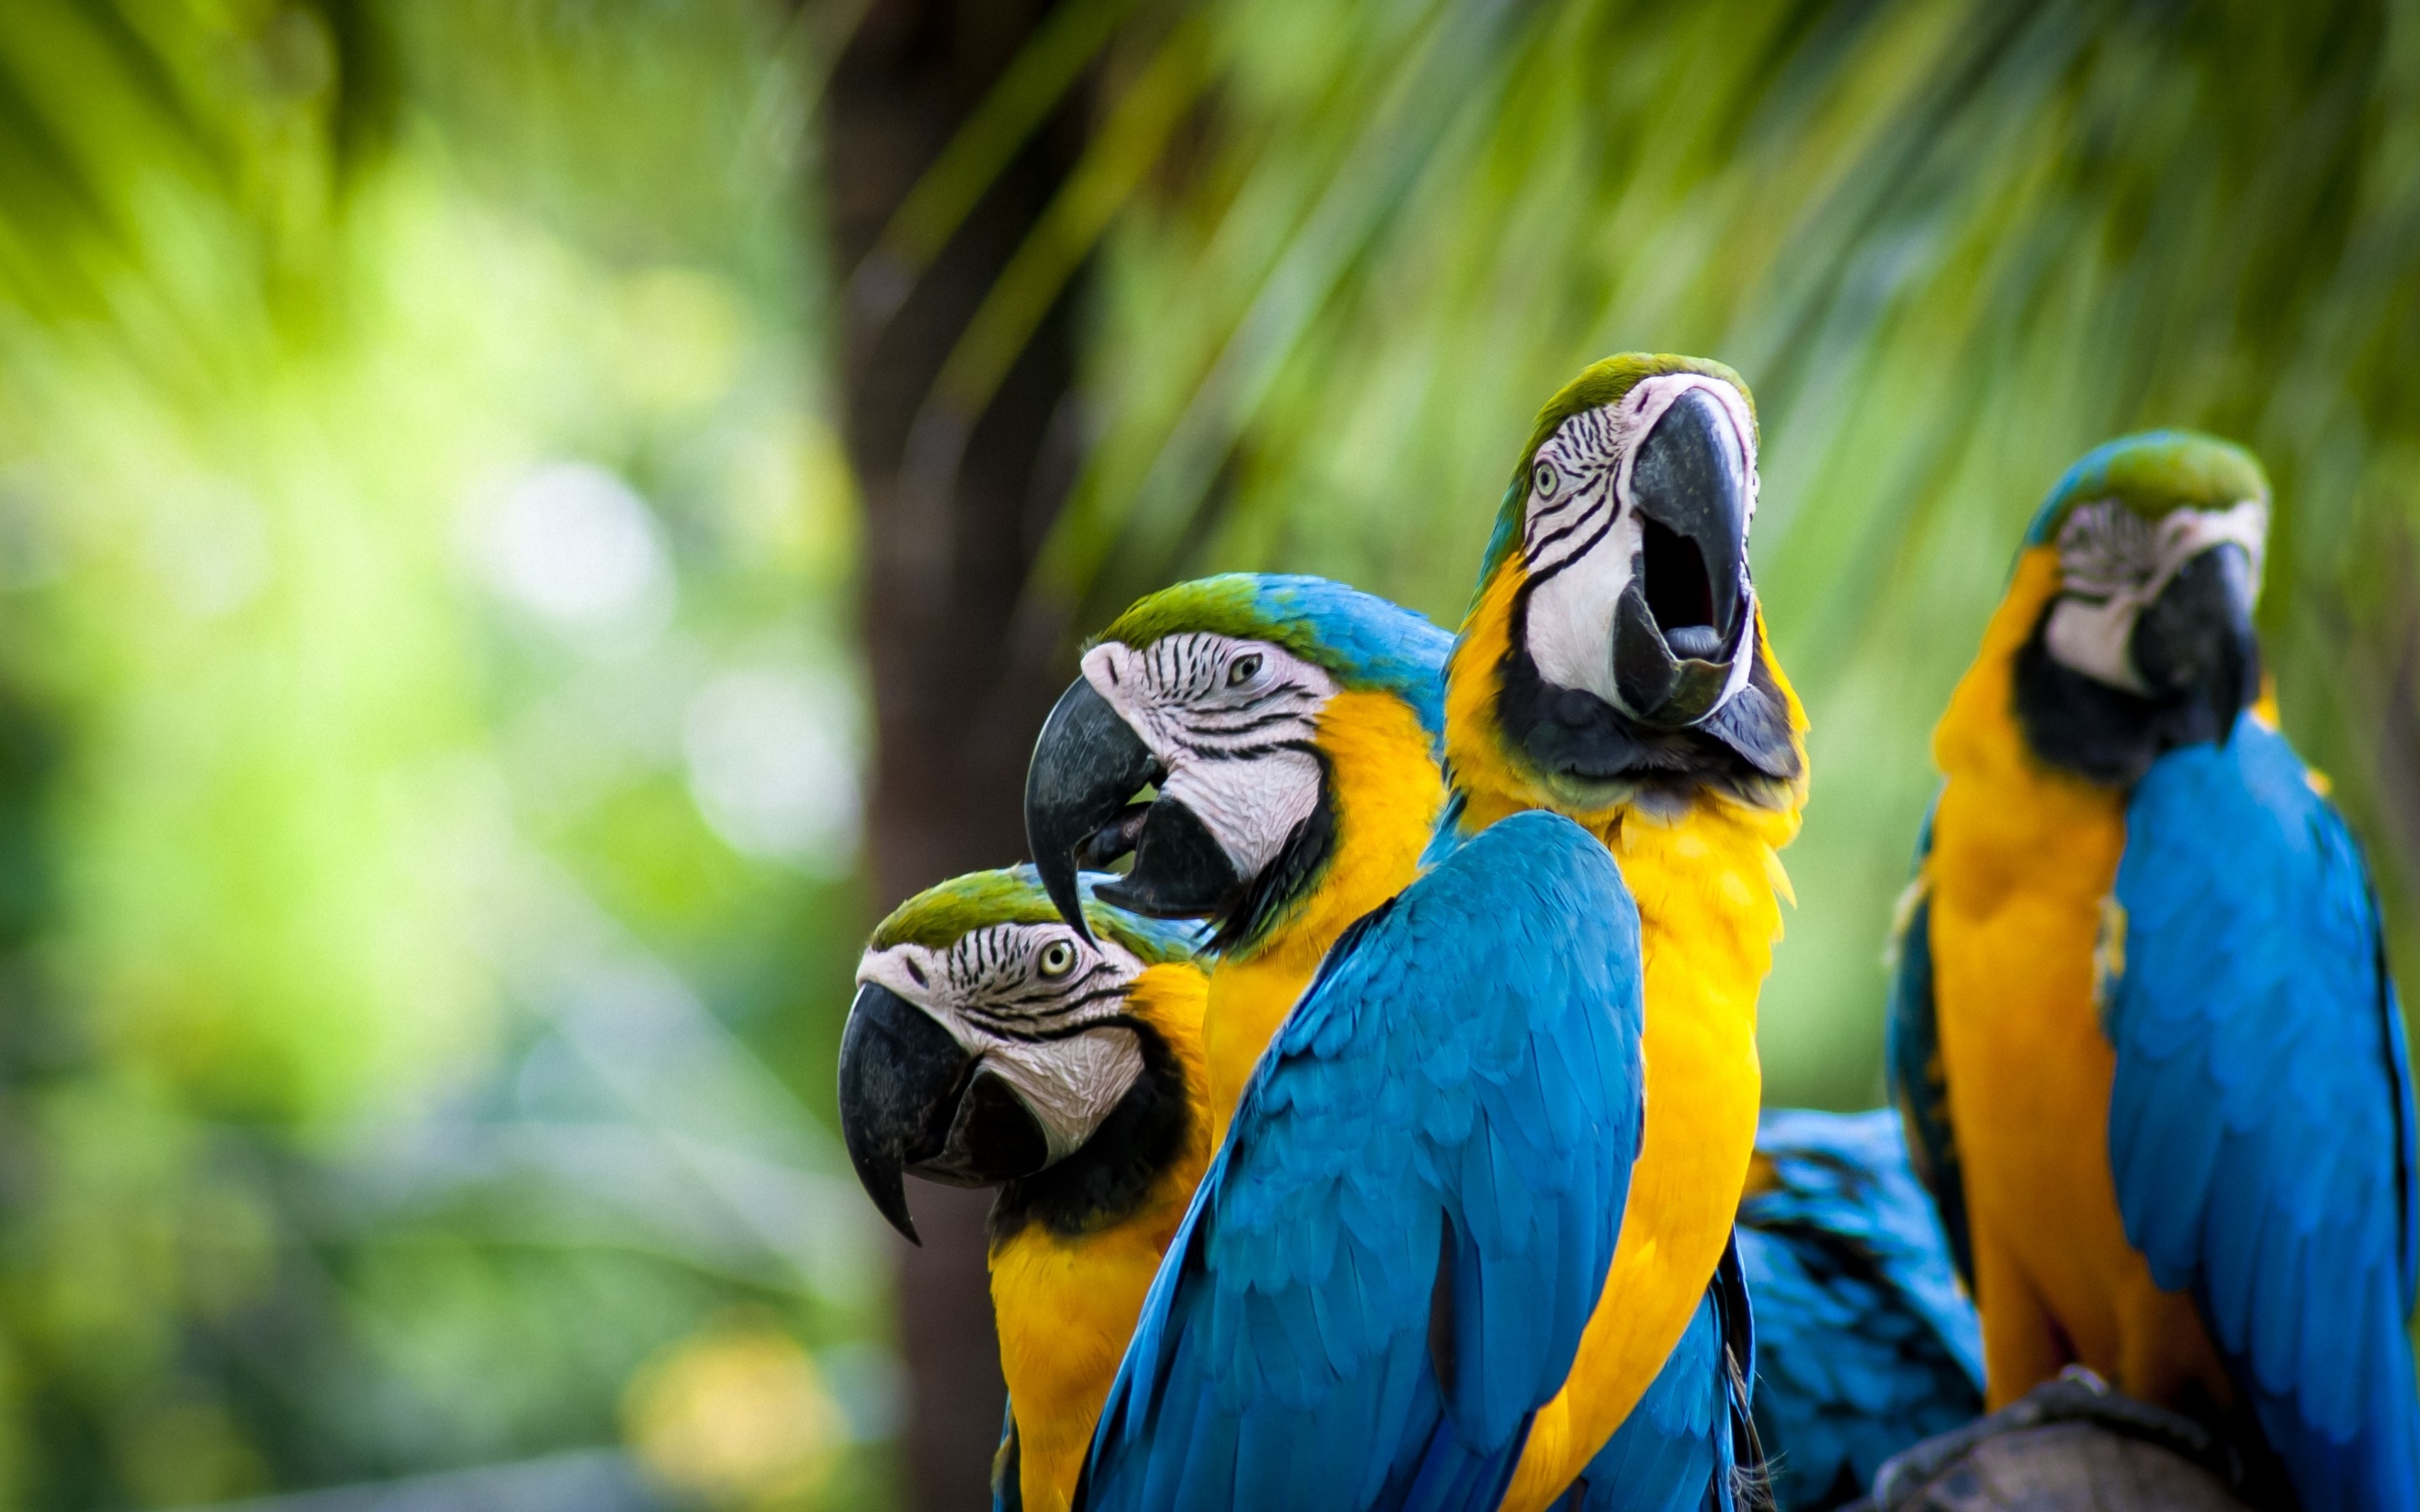 Beautiful Parrots Family for 2880 x 1800 Retina Display resolution